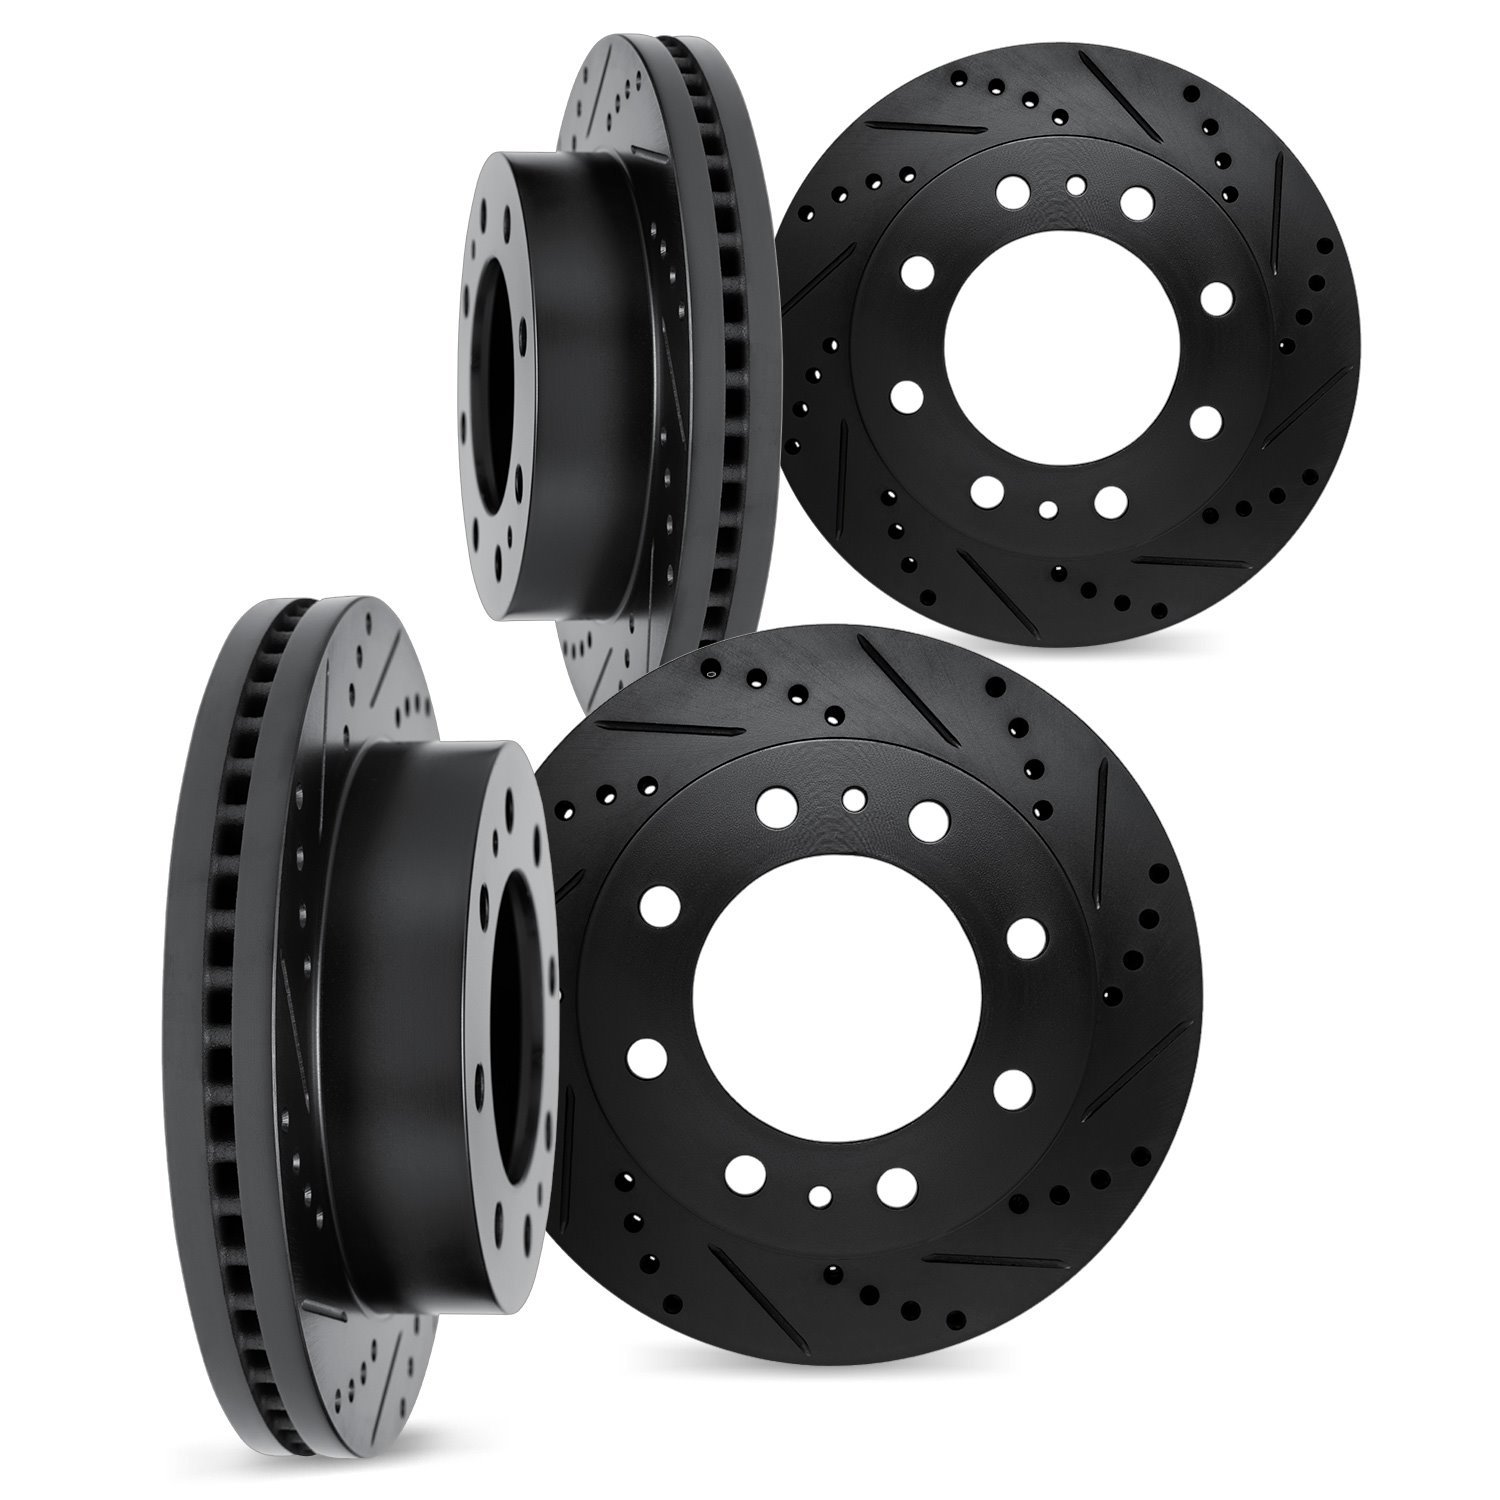 8004-54218 Drilled/Slotted Brake Rotors [Black], Fits Select Ford/Lincoln/Mercury/Mazda, Position: Front and Rear